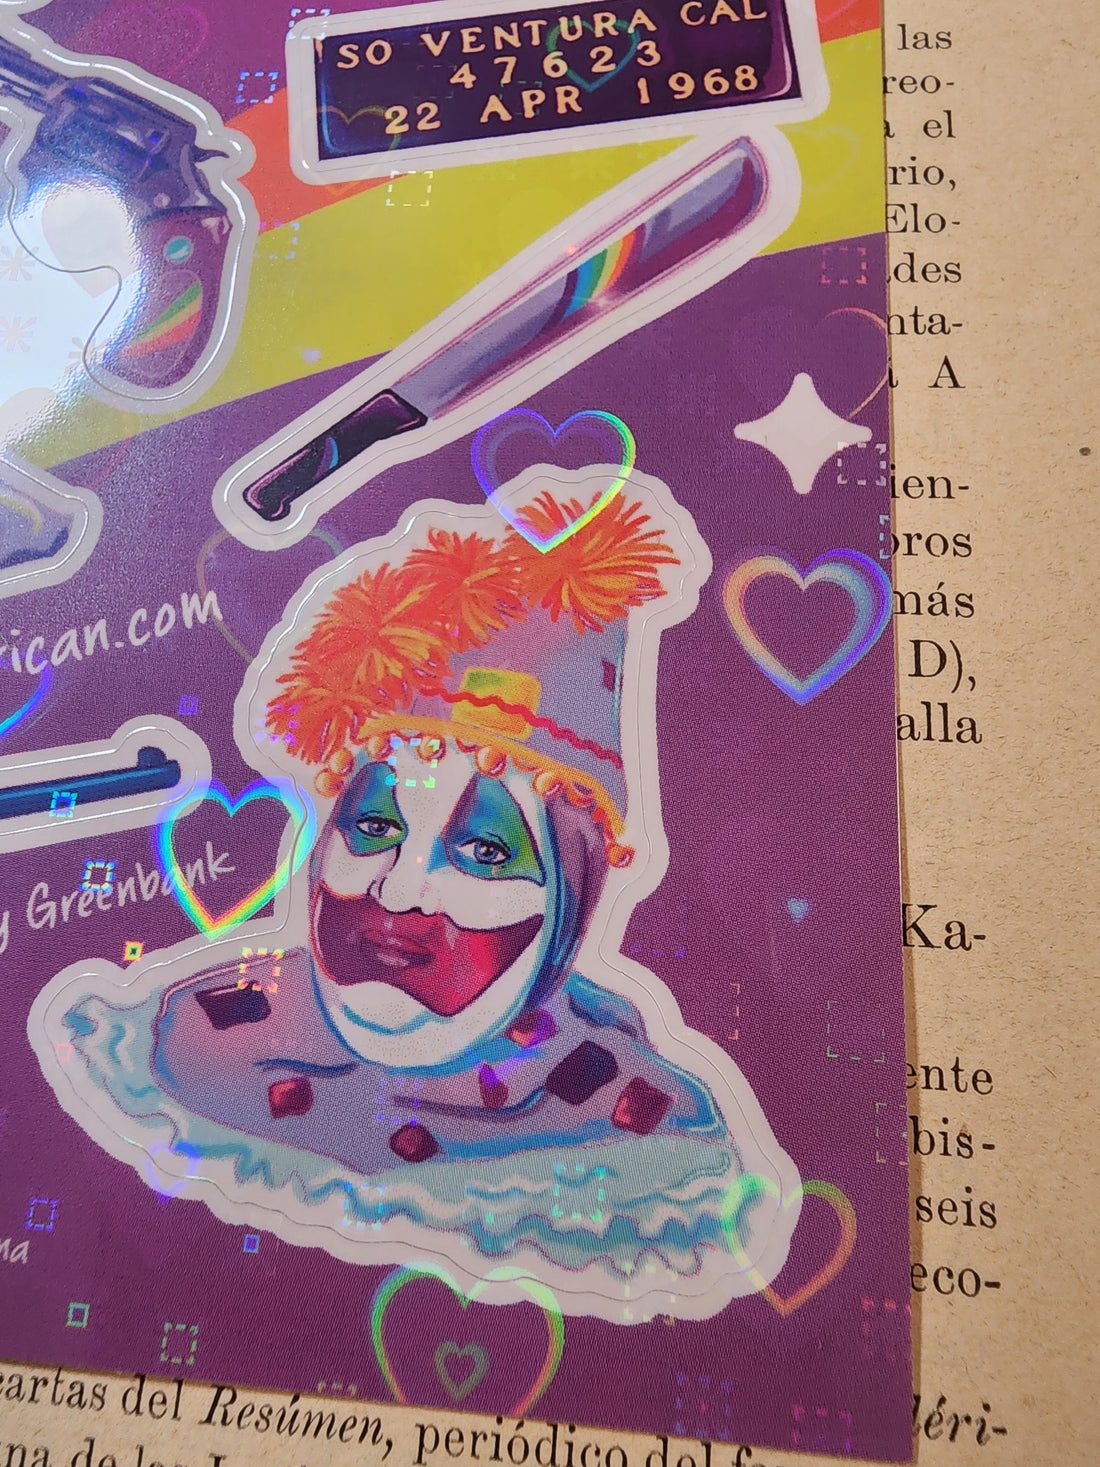 Serial Killer "90s style" Holographic Sticker Sheet